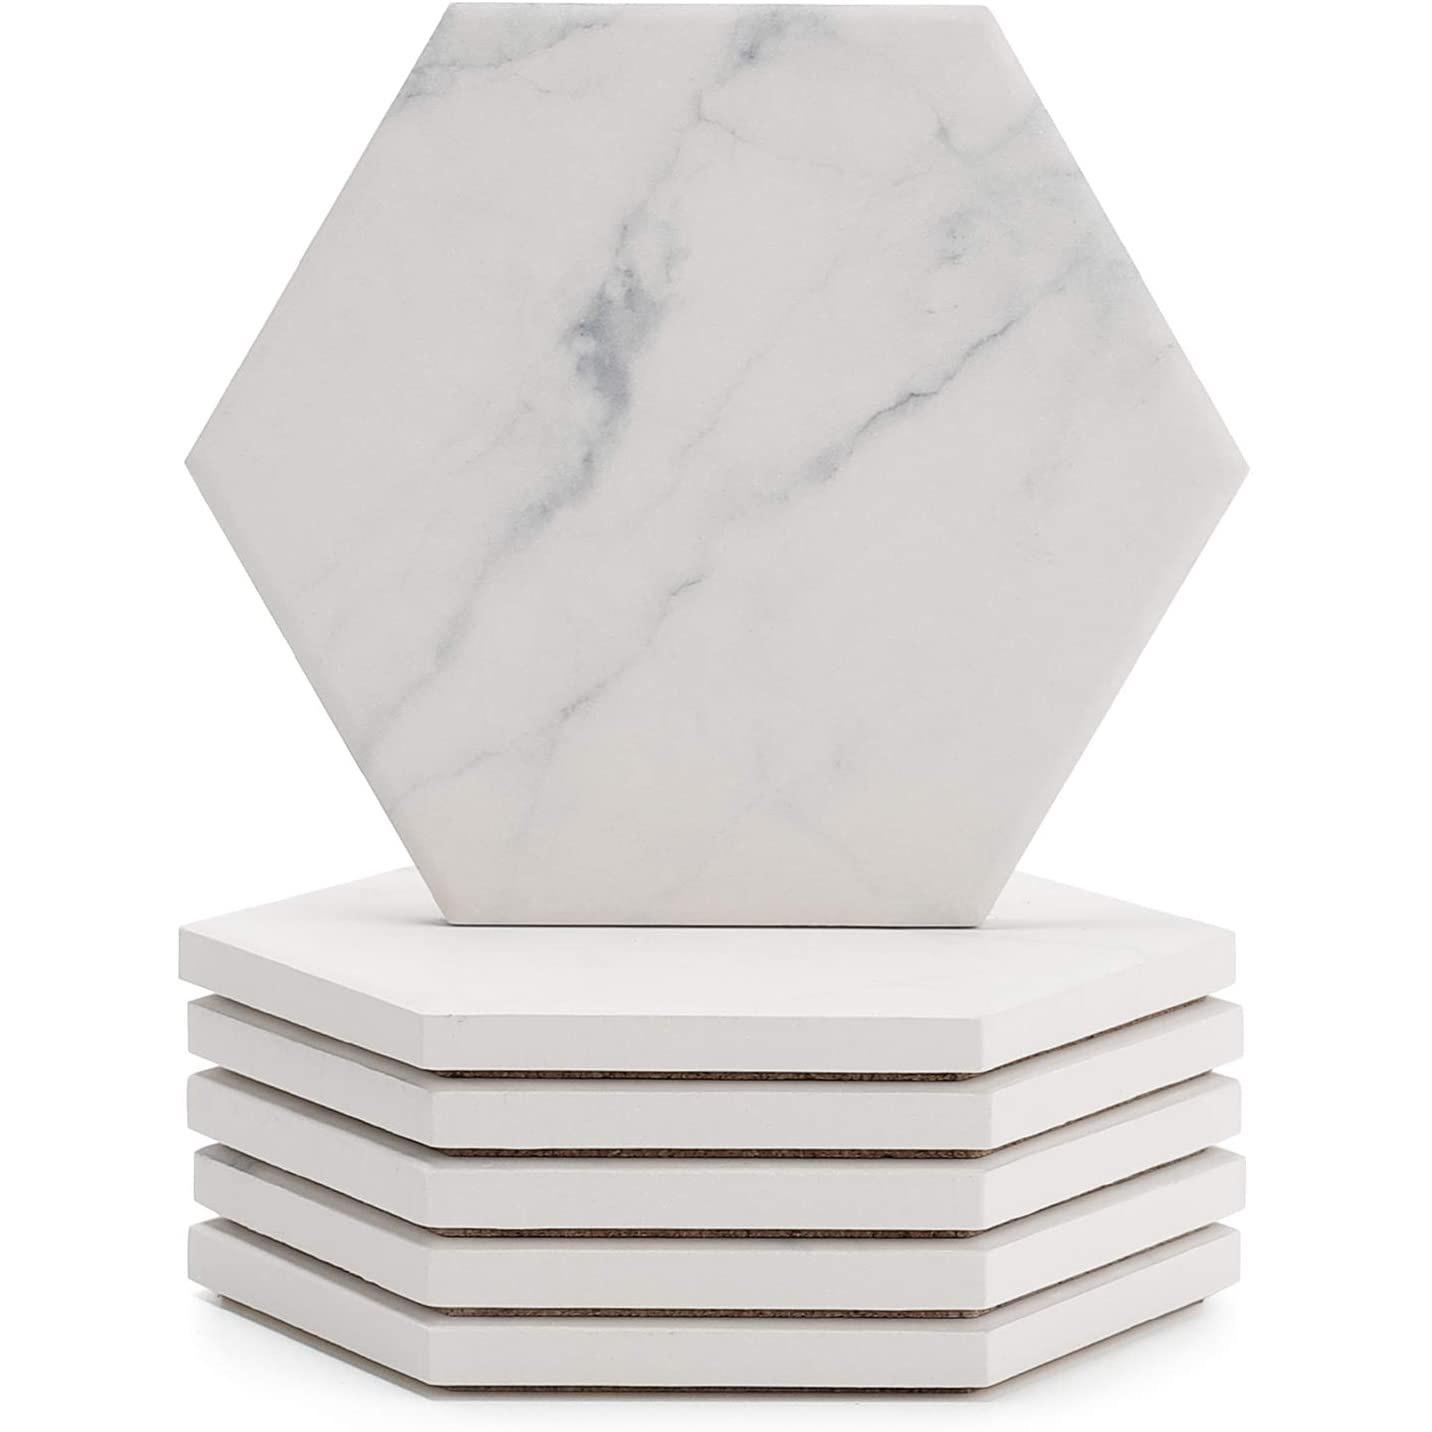 6 Sweese White Marble Pattern Absorbent Ceramic Coasters for $11.89